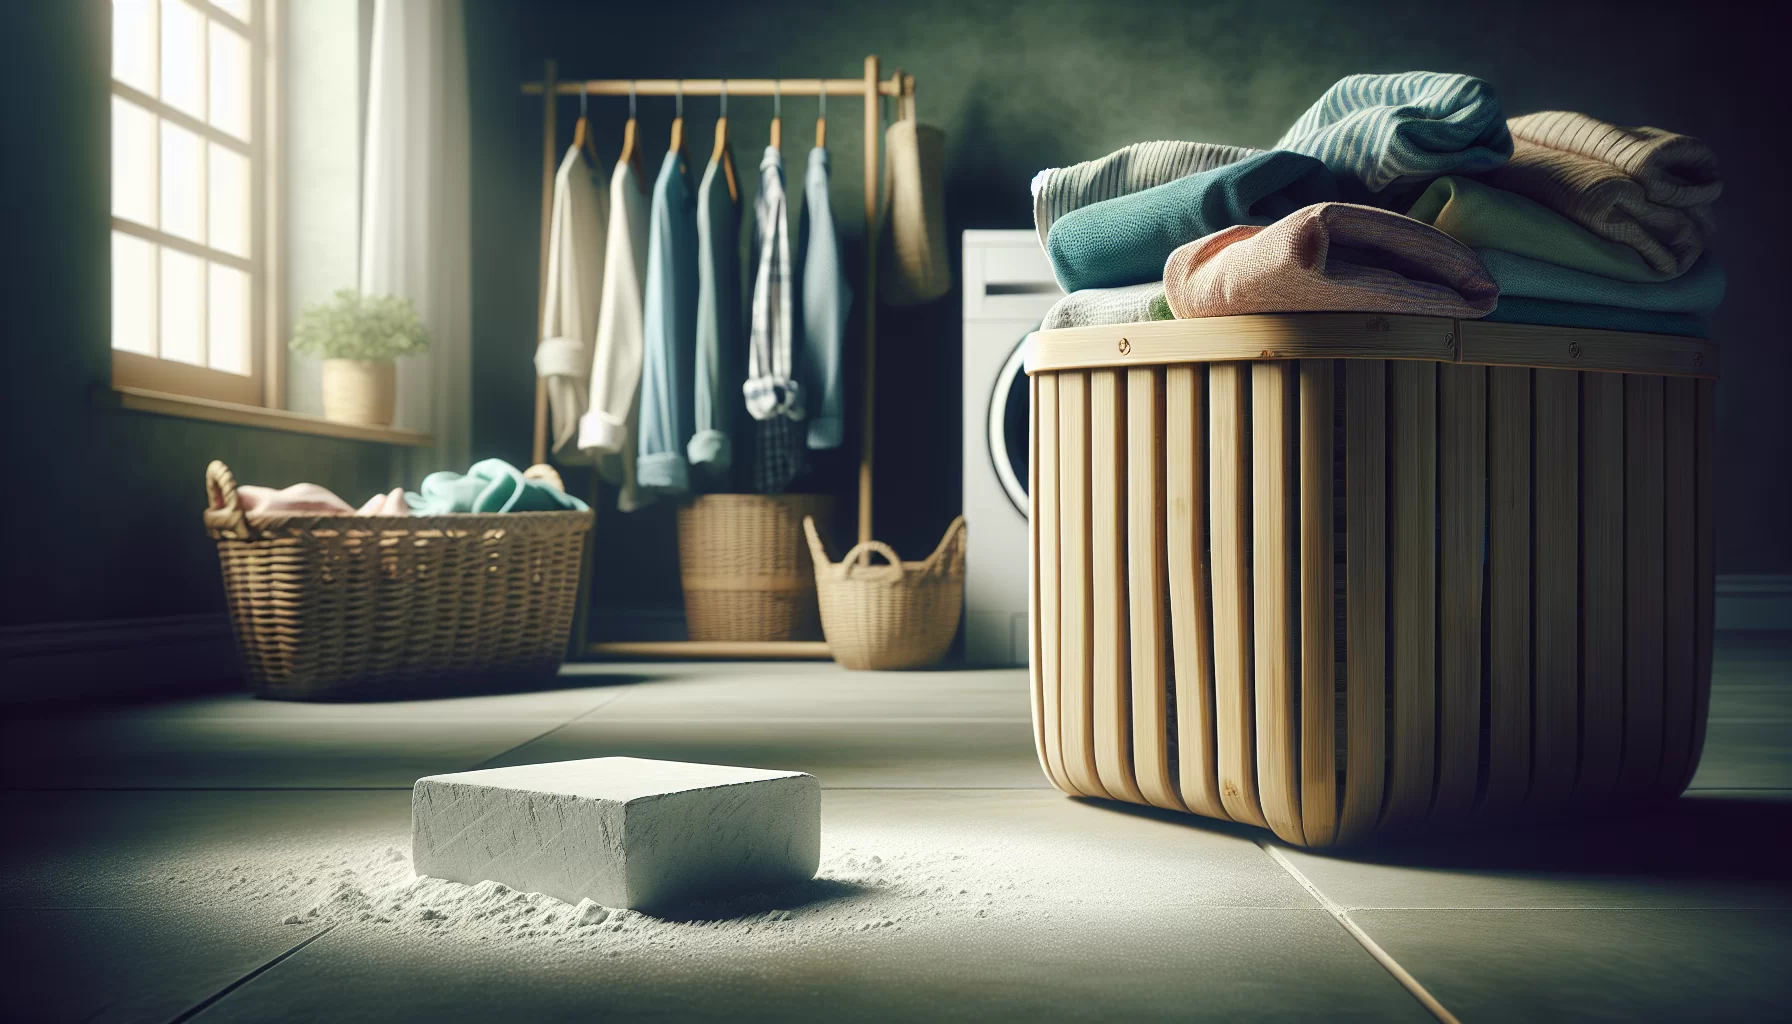 Discover the eco-friendly trick with chalk for odorless laundry hampers